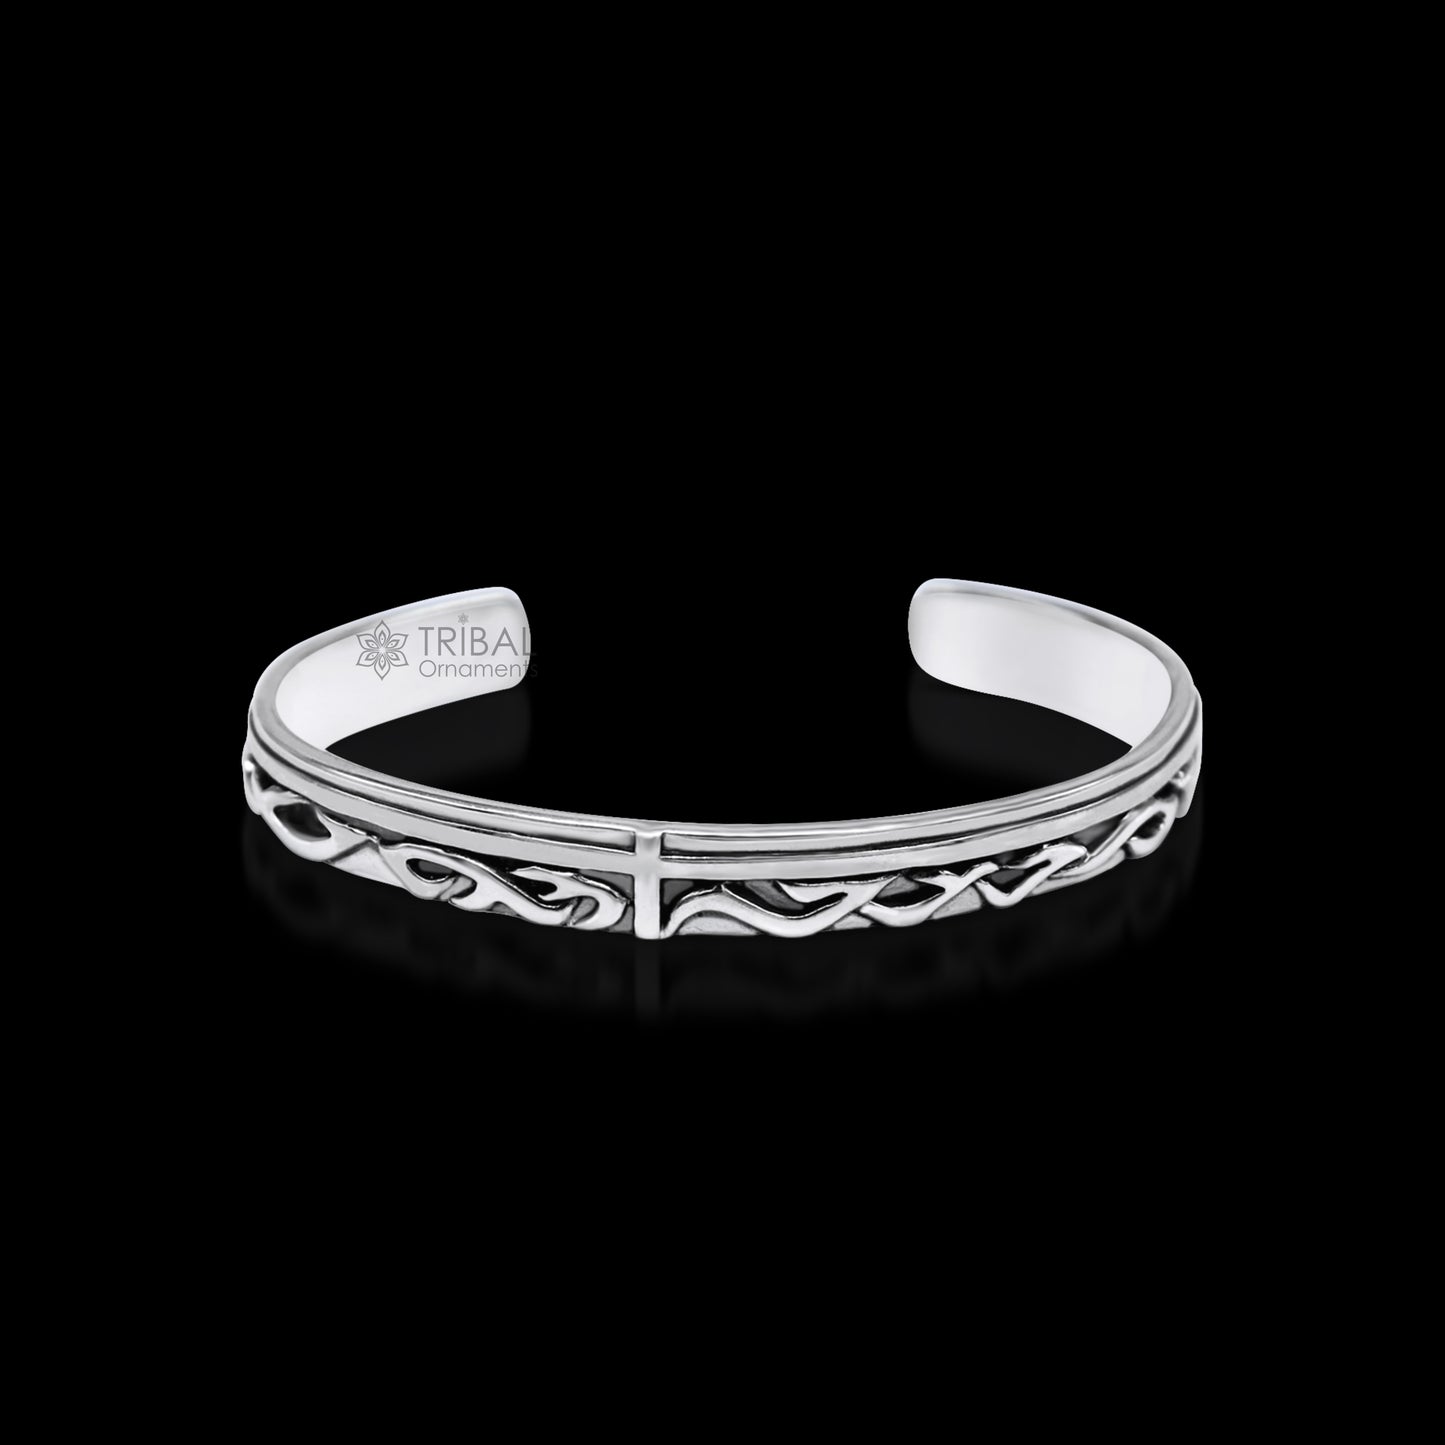 Vintage antique style 925 sterling silver handmade adjustable cuff bangle bracelet unsex gifting jewelry, solid cuff bracelet nsk372